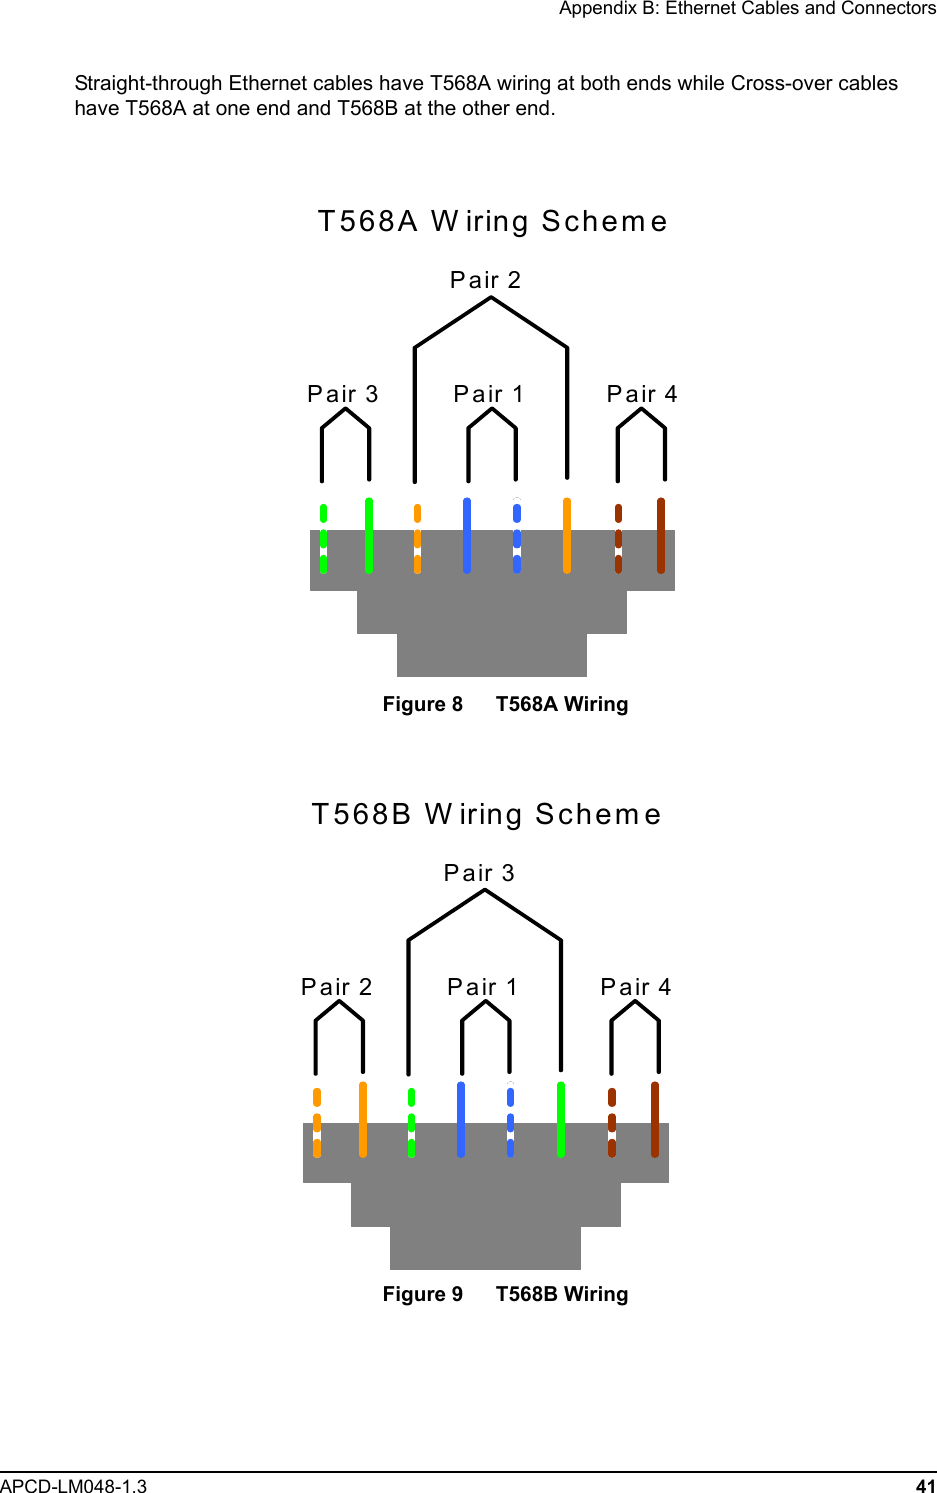 Appendix B: Ethernet Cables and ConnectorsAPCD-LM048-1.3 41Straight-through Ethernet cables have T568A wiring at both ends while Cross-over cables have T568A at one end and T568B at the other end.Figure 8   T568A WiringFigure 9   T568B WiringPair 2T568A W iring SchemePair 3 Pair 1 Pair 4T568B W iring SchemePair 3Pair 2 Pair 1 Pair 4